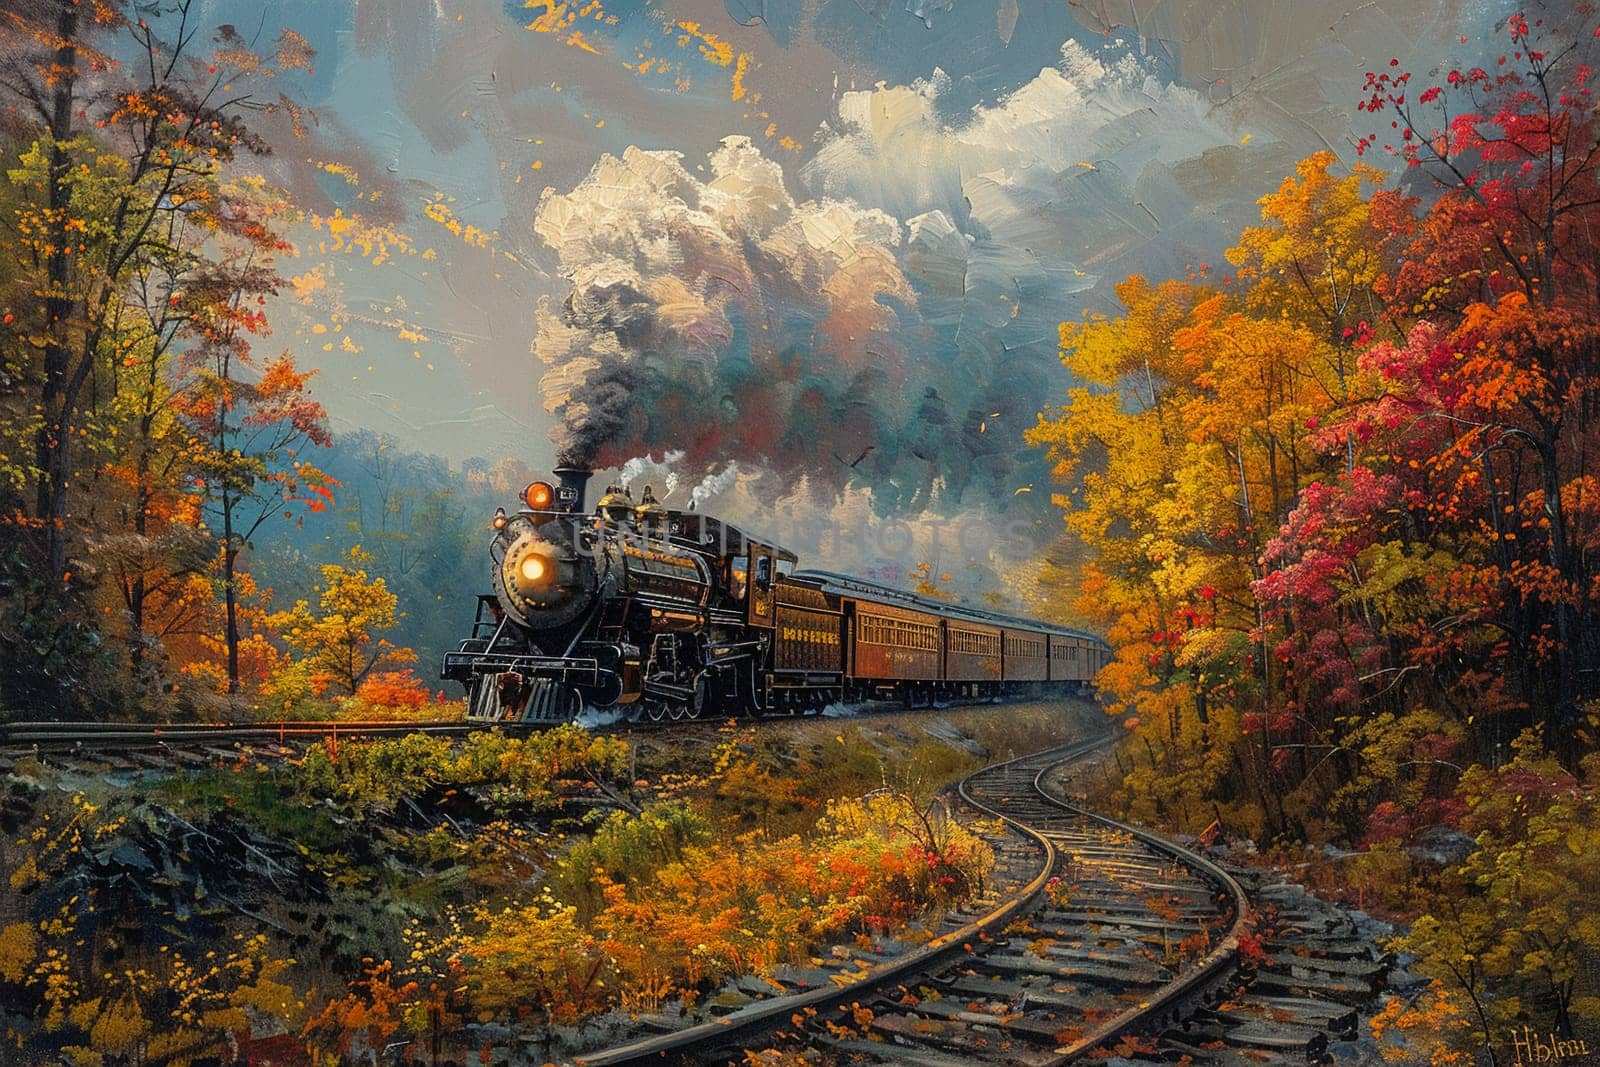 Vintage train puffing through a scenic landscape, painted in an impressionist style with a touch of romance.